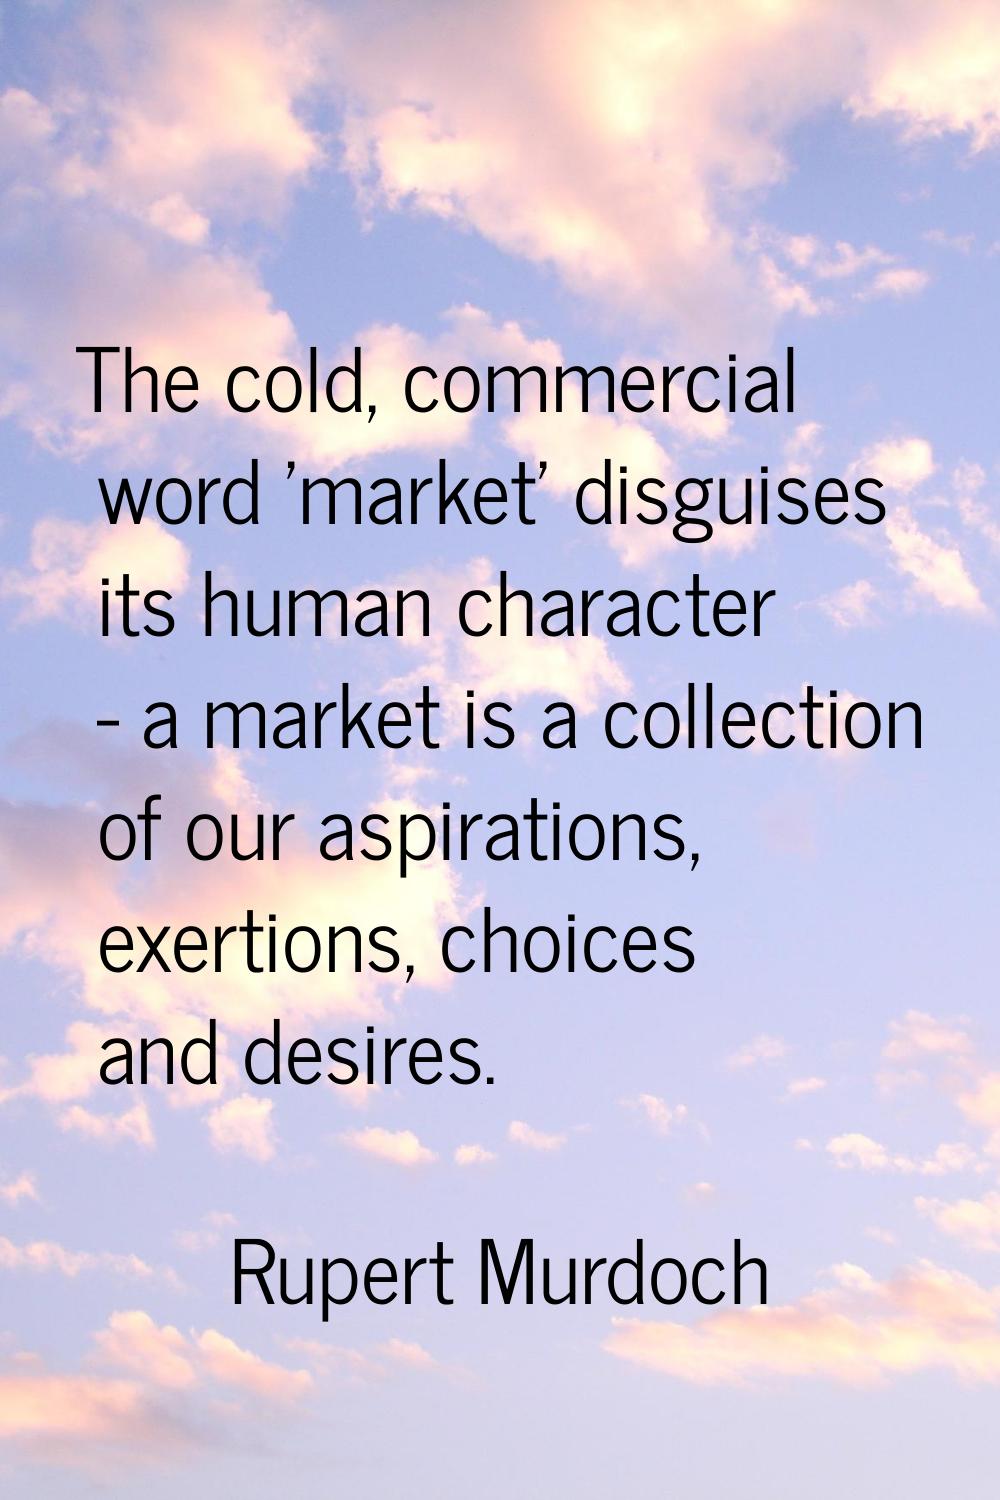 The cold, commercial word 'market' disguises its human character - a market is a collection of our 